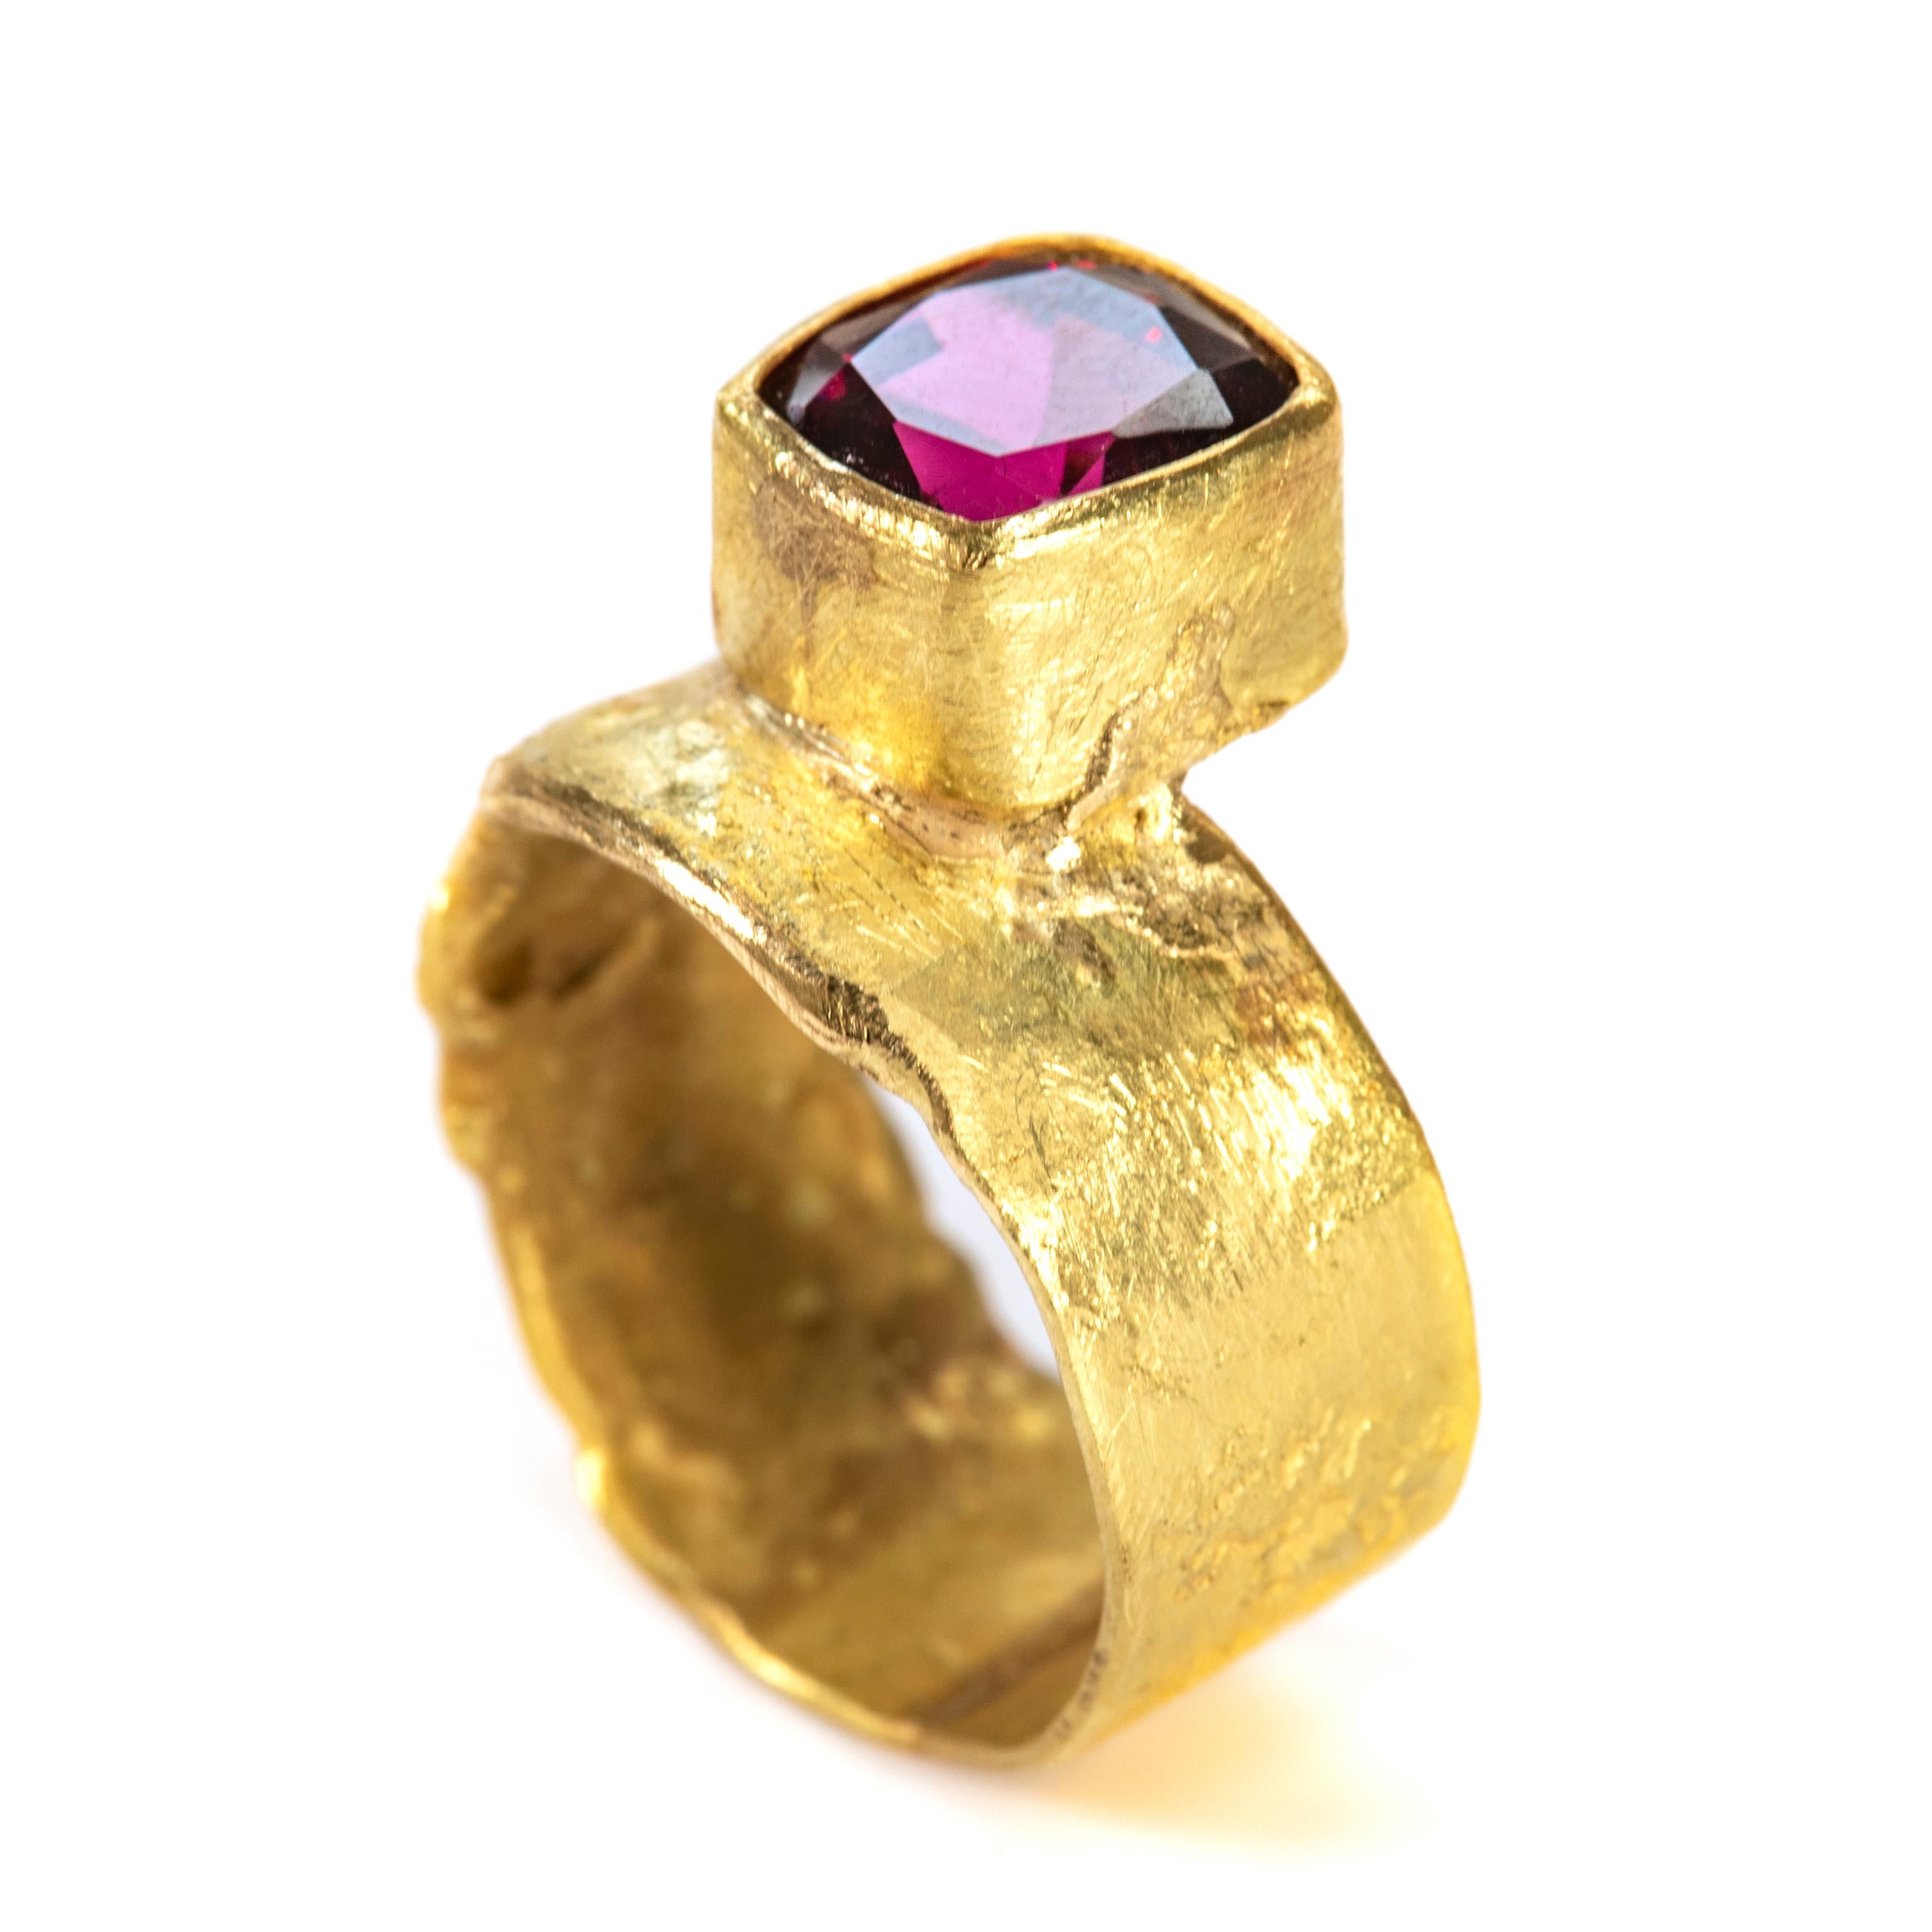 18k gold wide organic ring with cushion cut Kenyan Rhodolite Garnet. The stone is 3.56cts and the band is 9mm wide,  The ring features a tapered rub over setting to enhance and frame the stone.

Disa Allsopp handmakes each ring using traditional